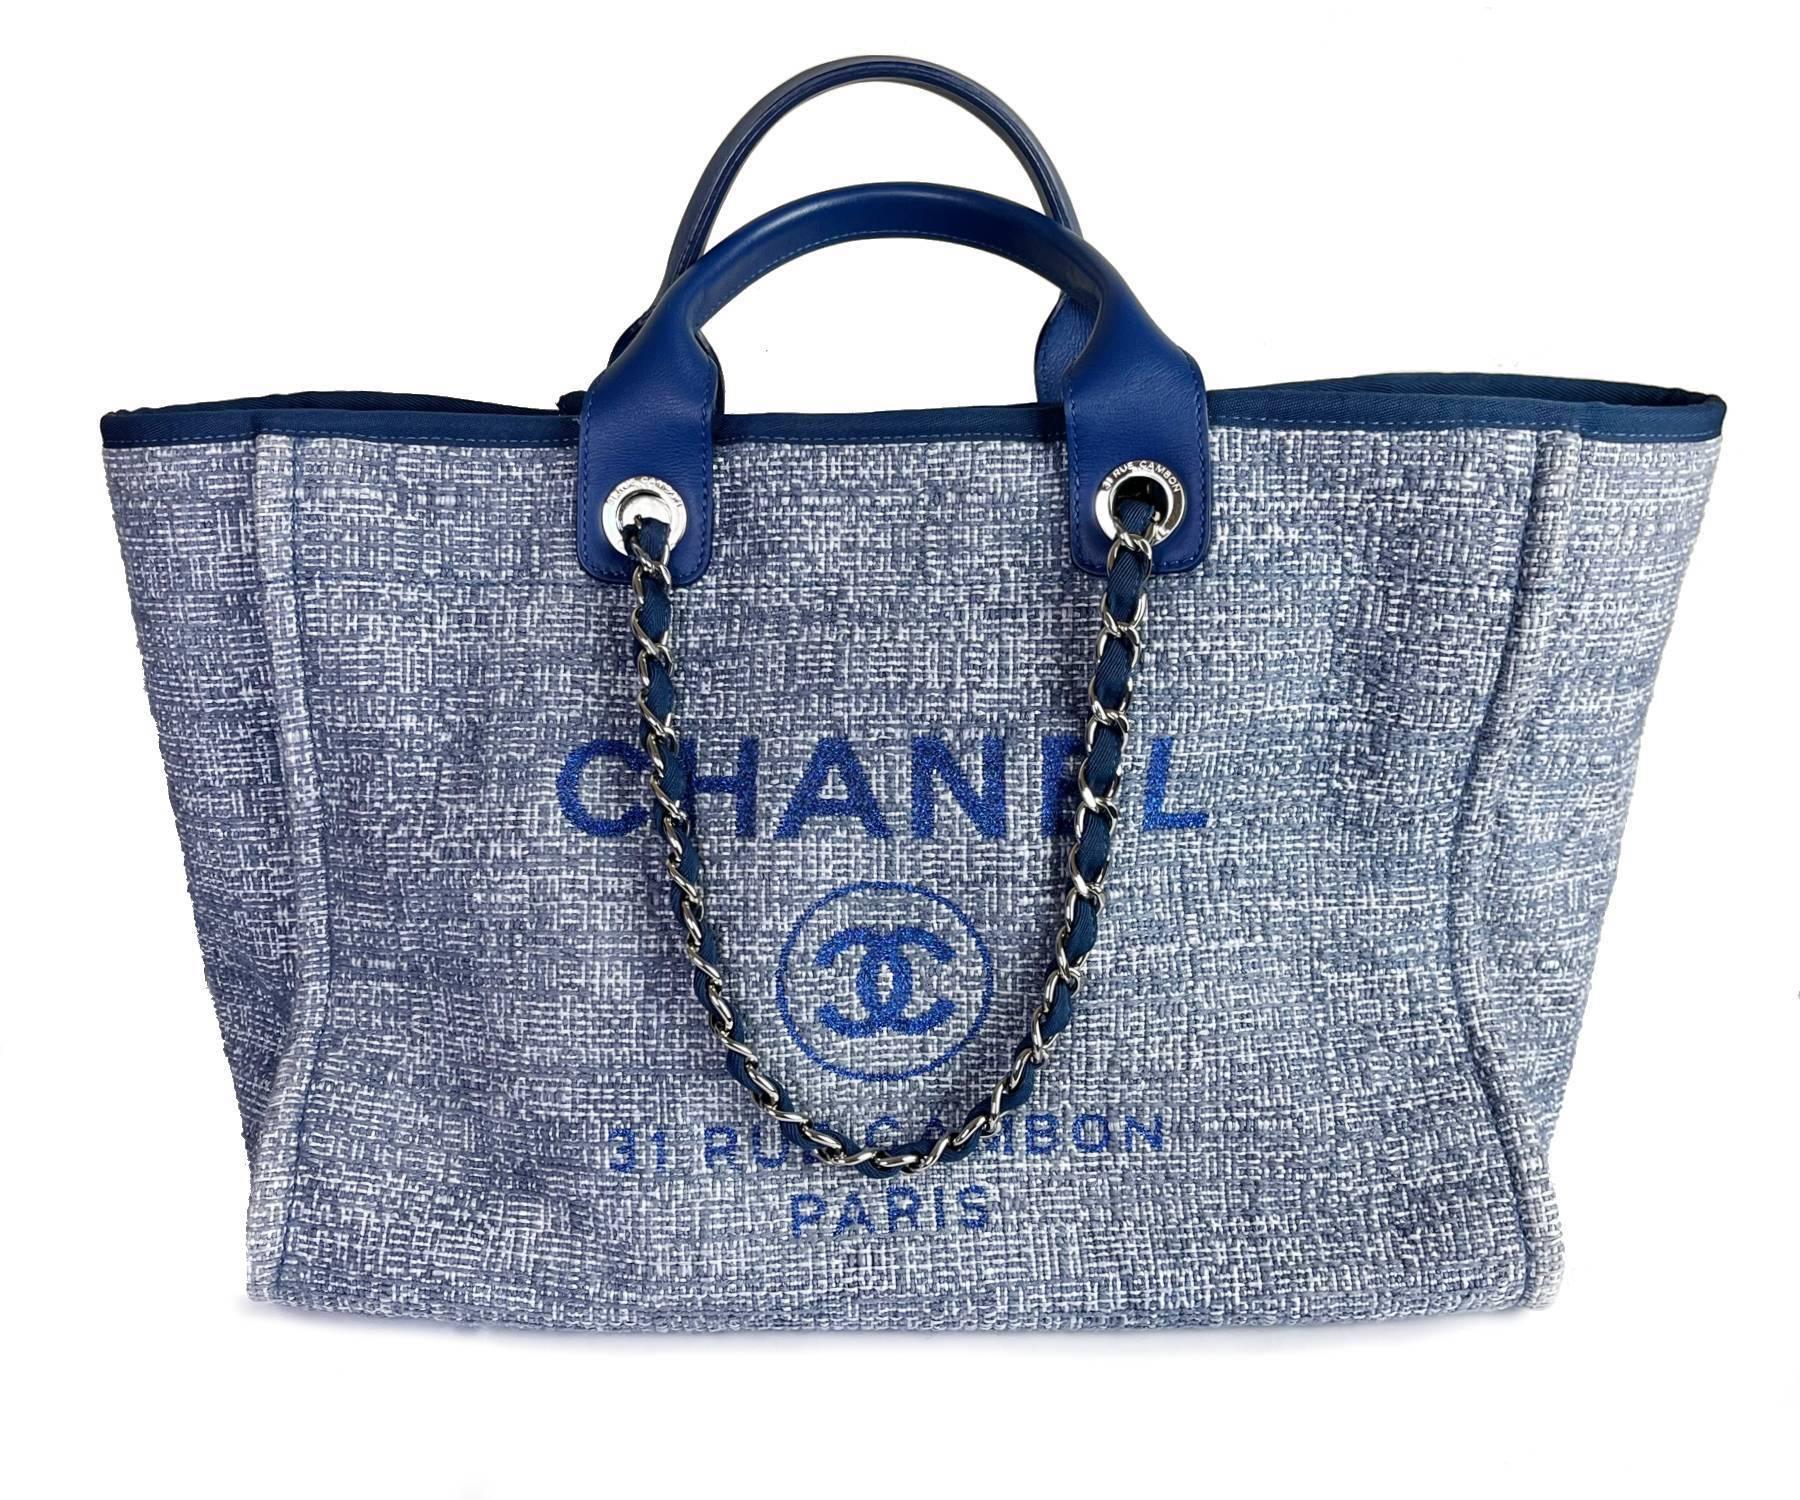 Chanel Blue Cloth Blue Leather Deauville Large Tote Bag

* 2493 xxxx
* Made in Italy
*Comes with the control number card
* As seen on Rihanna and Miranda Kerr

-It is approximately 14.75